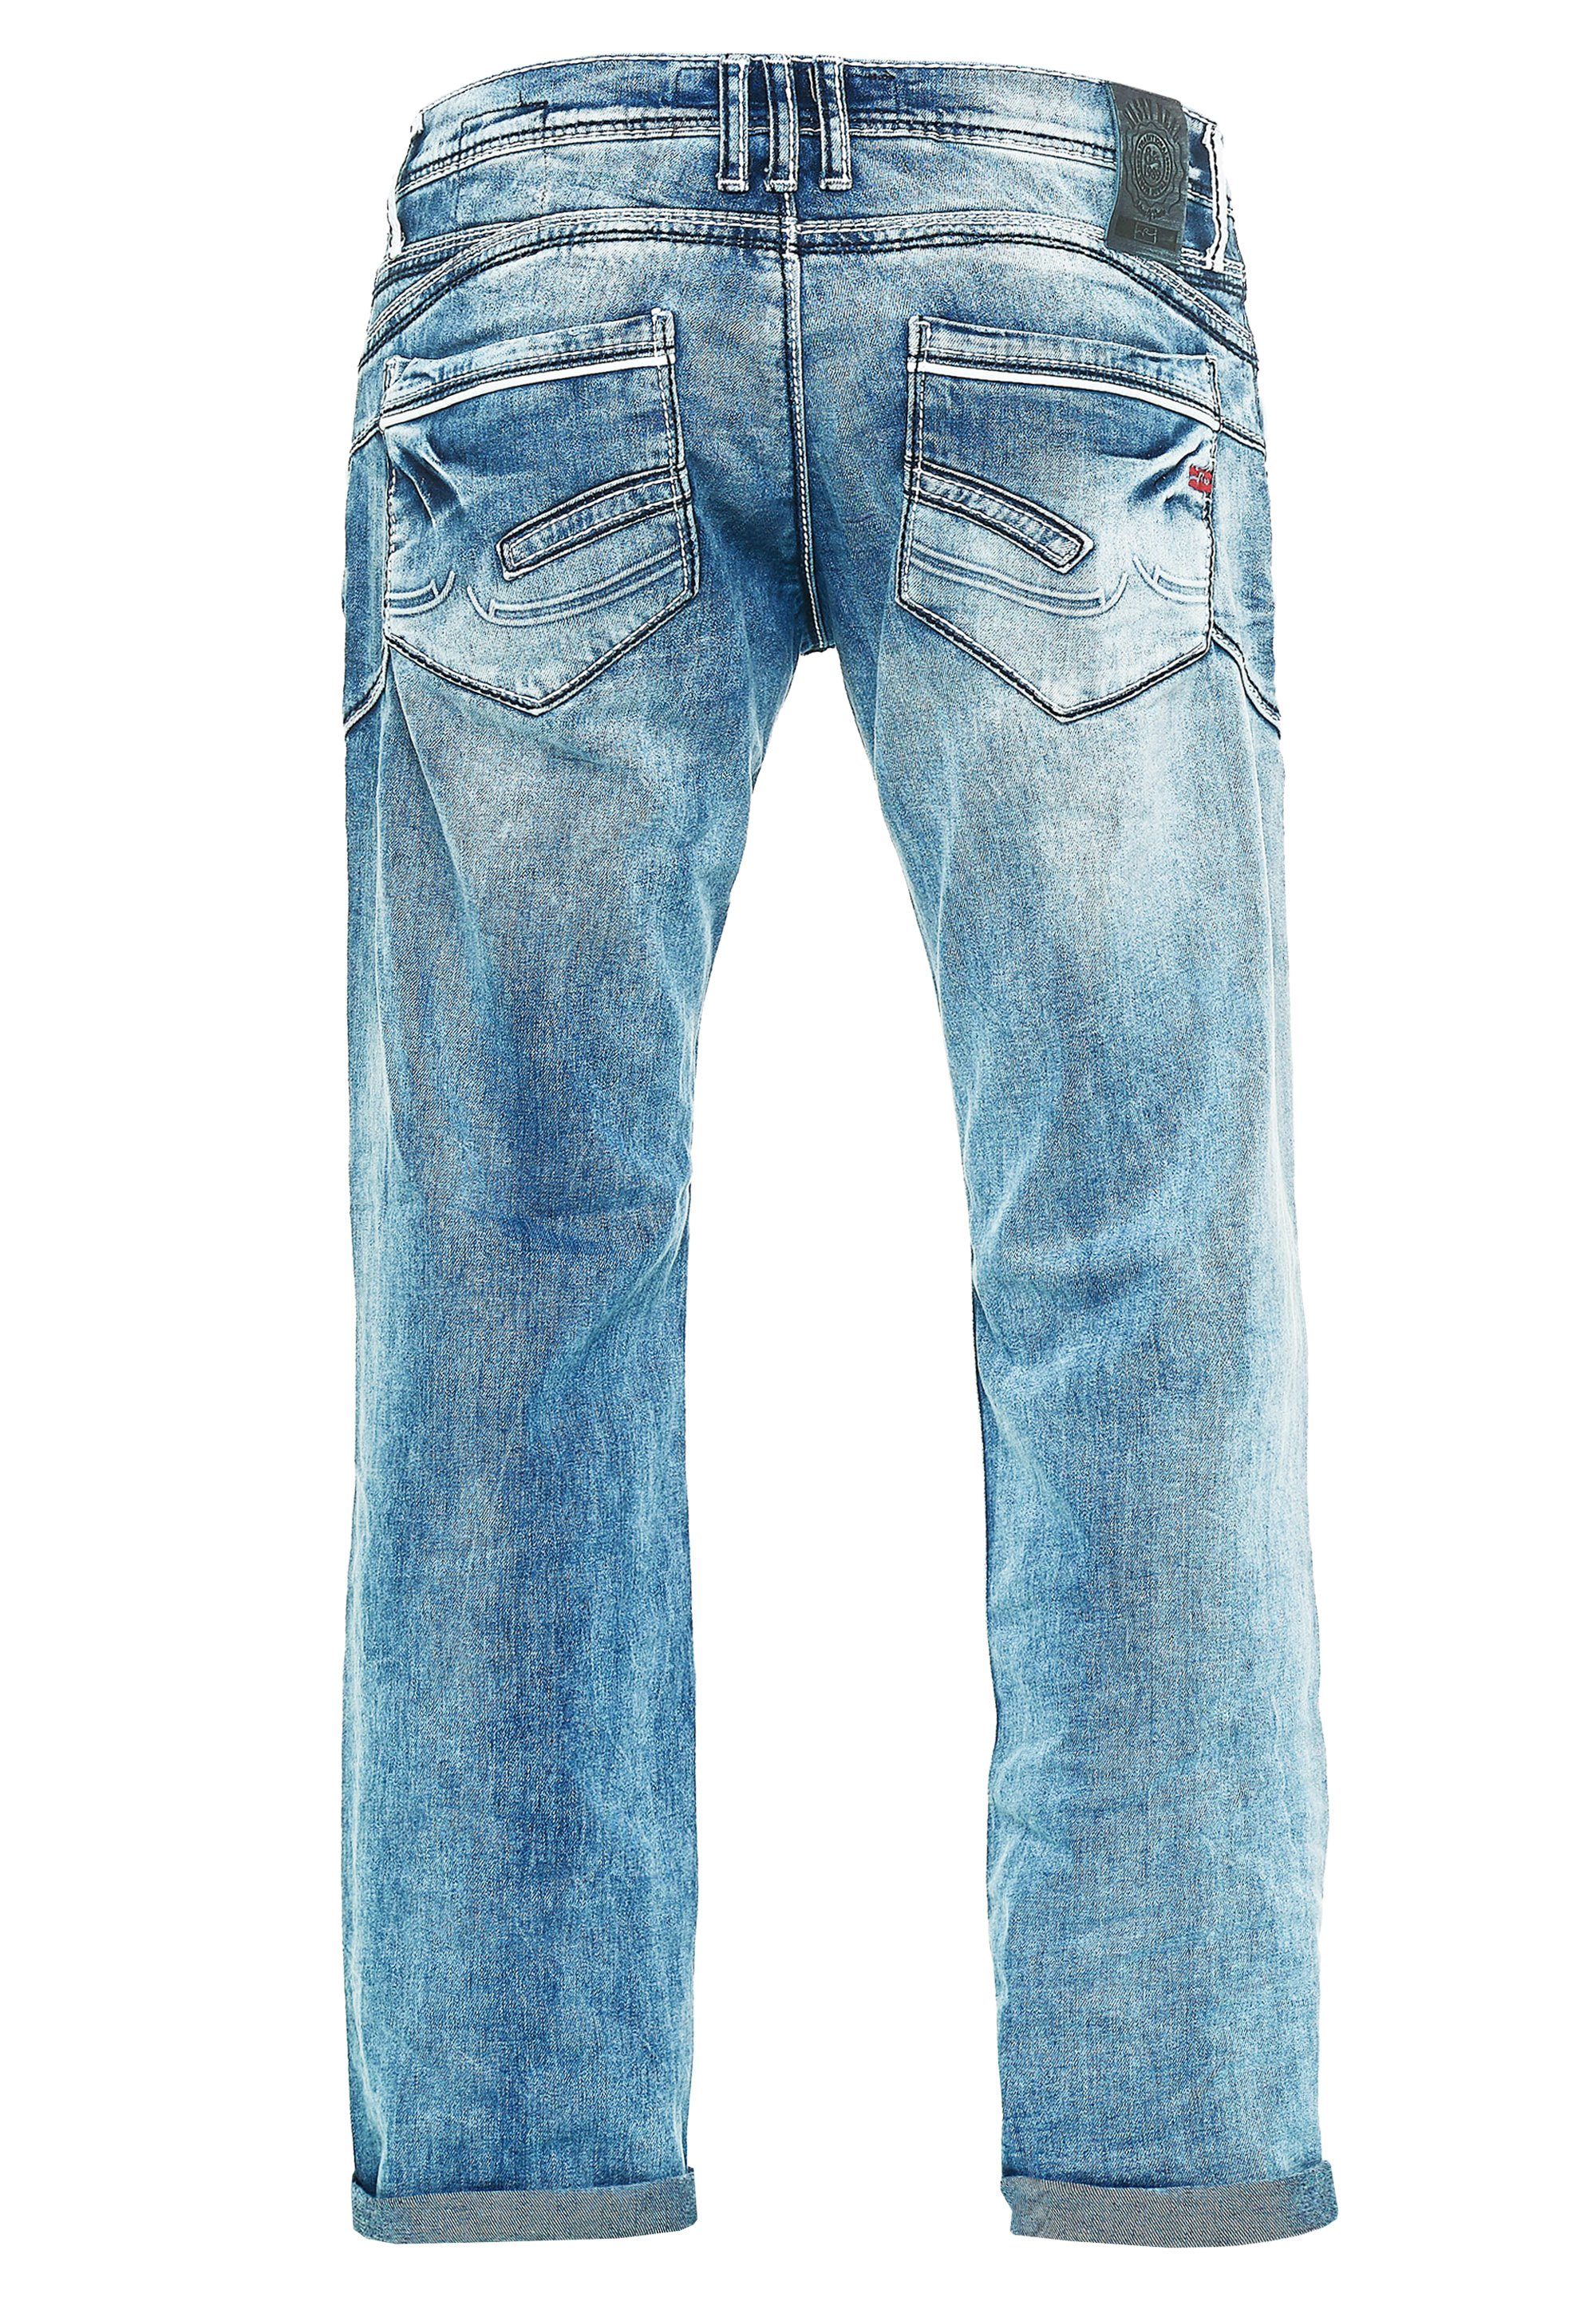 Rusty Neal Bequeme mit Waschung Jeans cooler